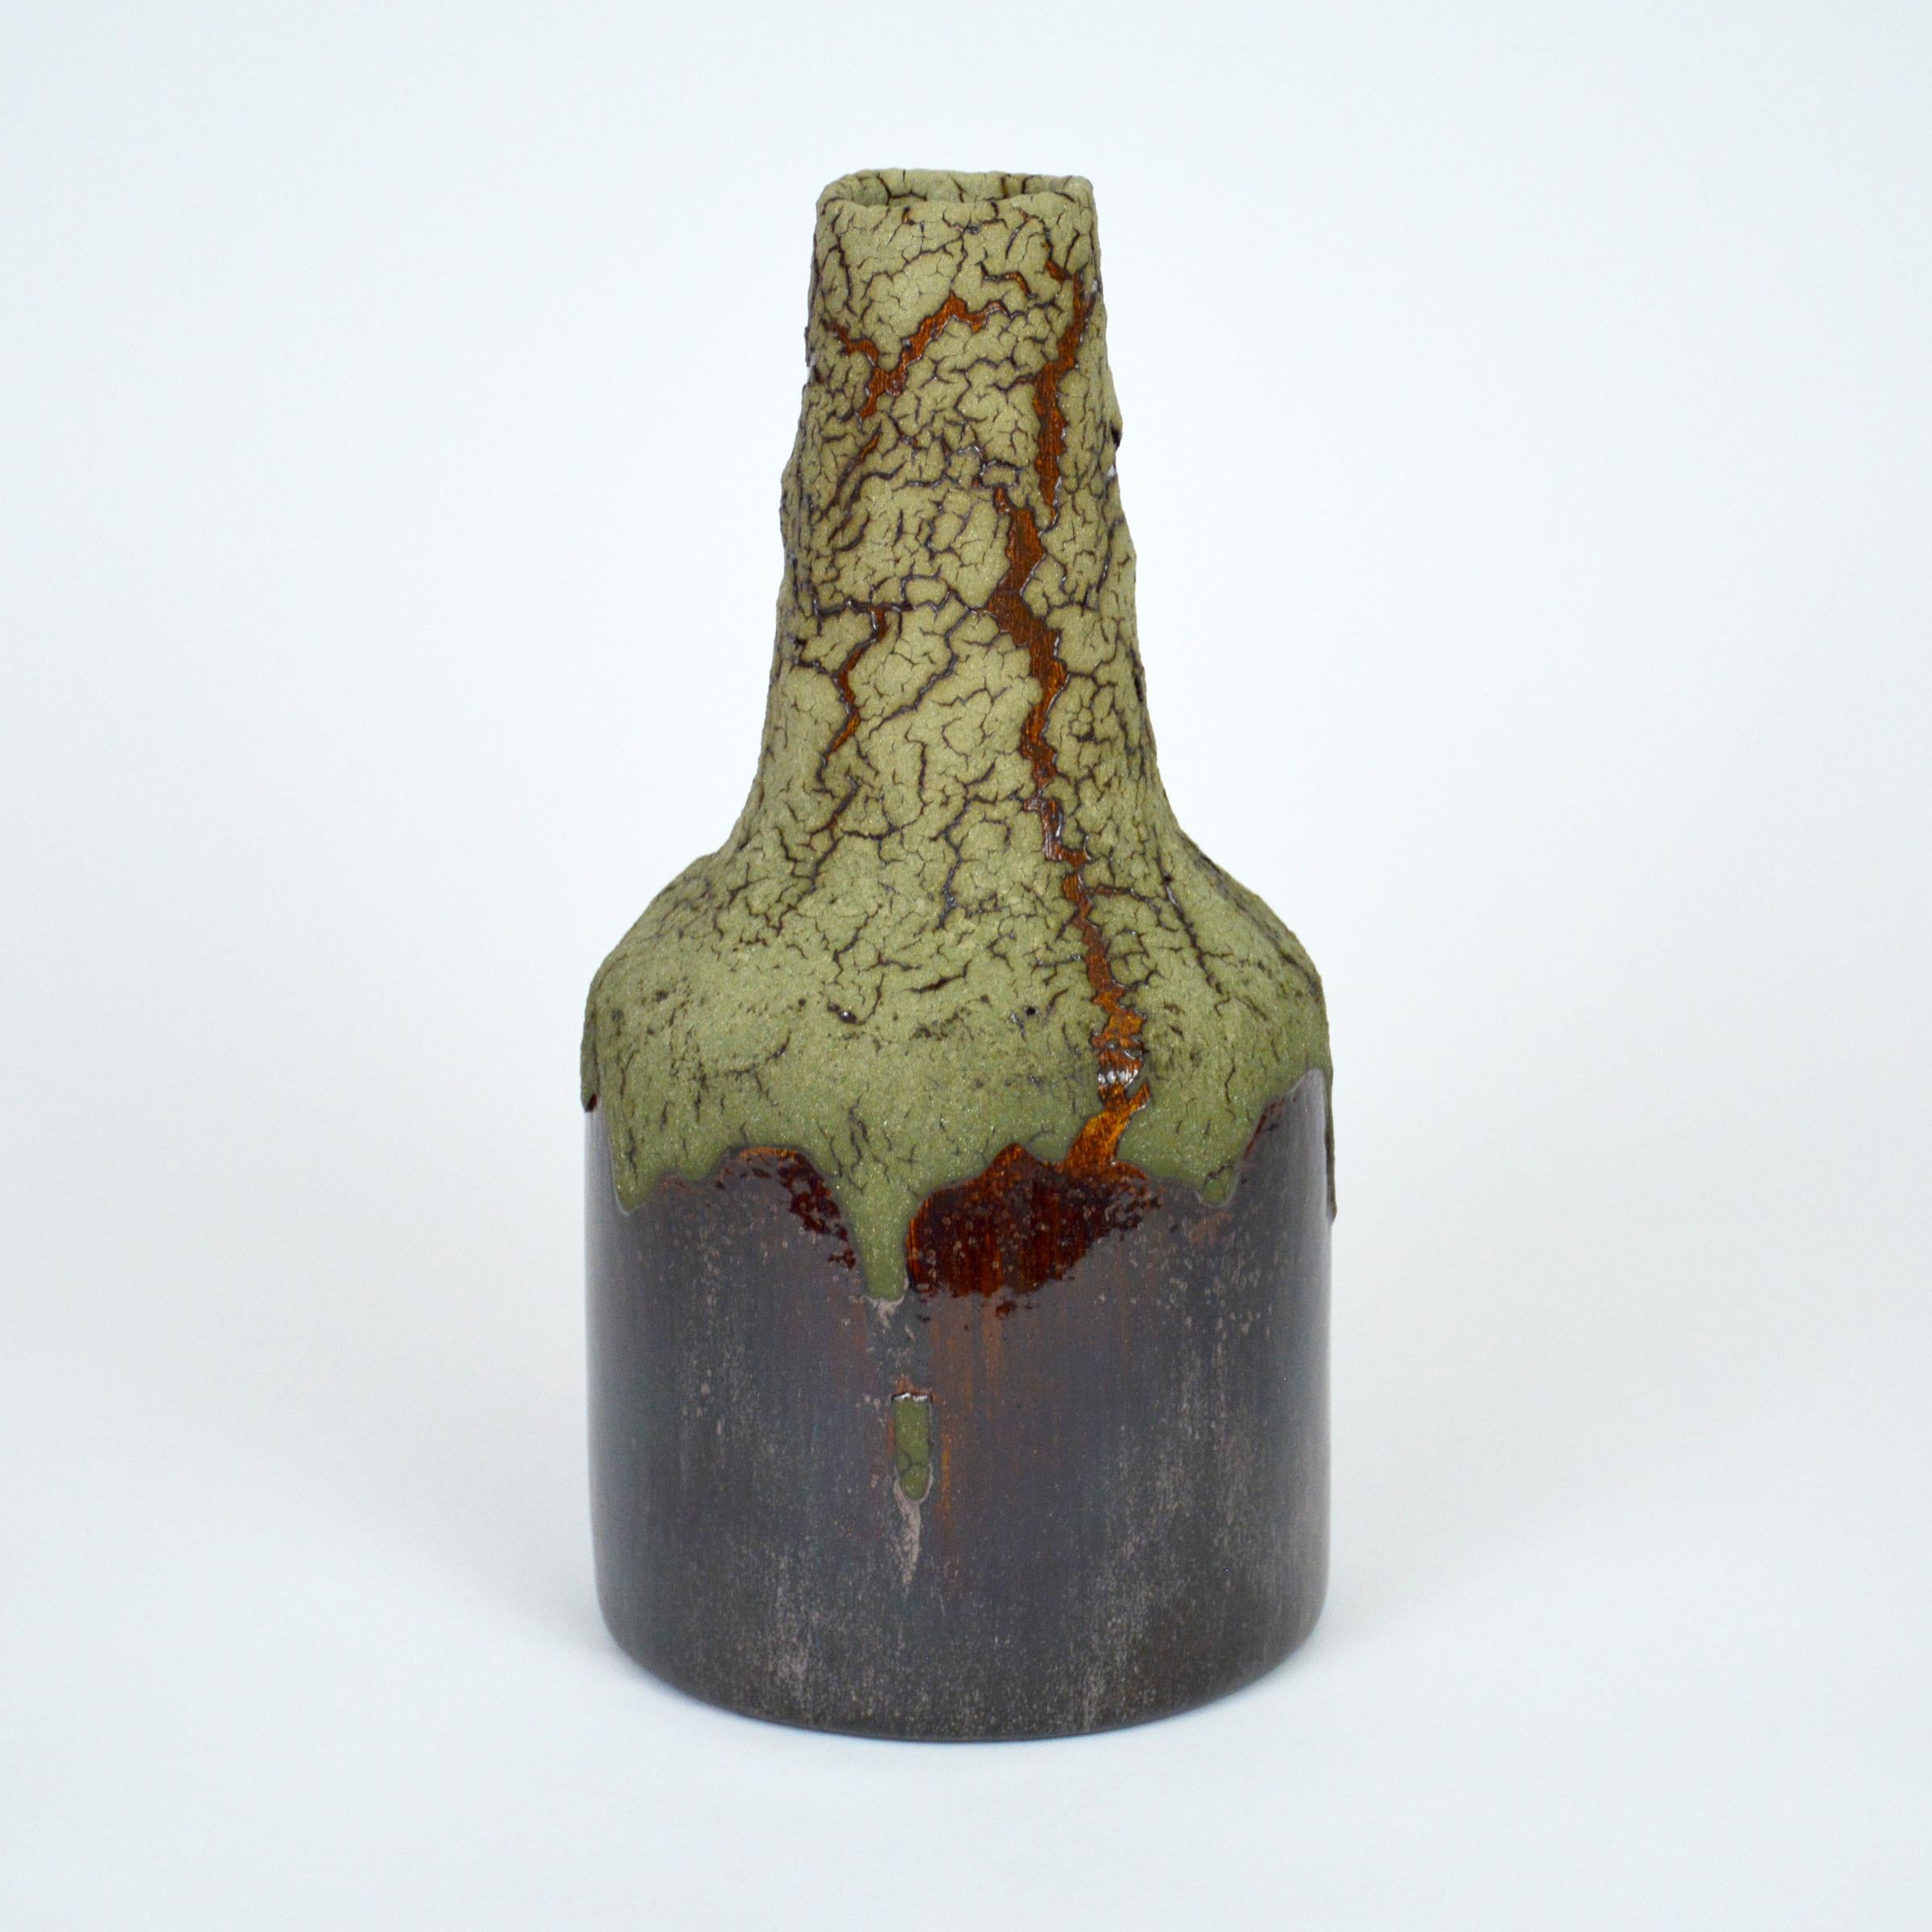 Green lava ceramic bottle by William Edwards.
Hand built earthenware vessel, fired multiple times to achieve a textured surface of random abstraction, matte green glaze with dark amber gloss metallic, microcrystalline glaze breaking through that